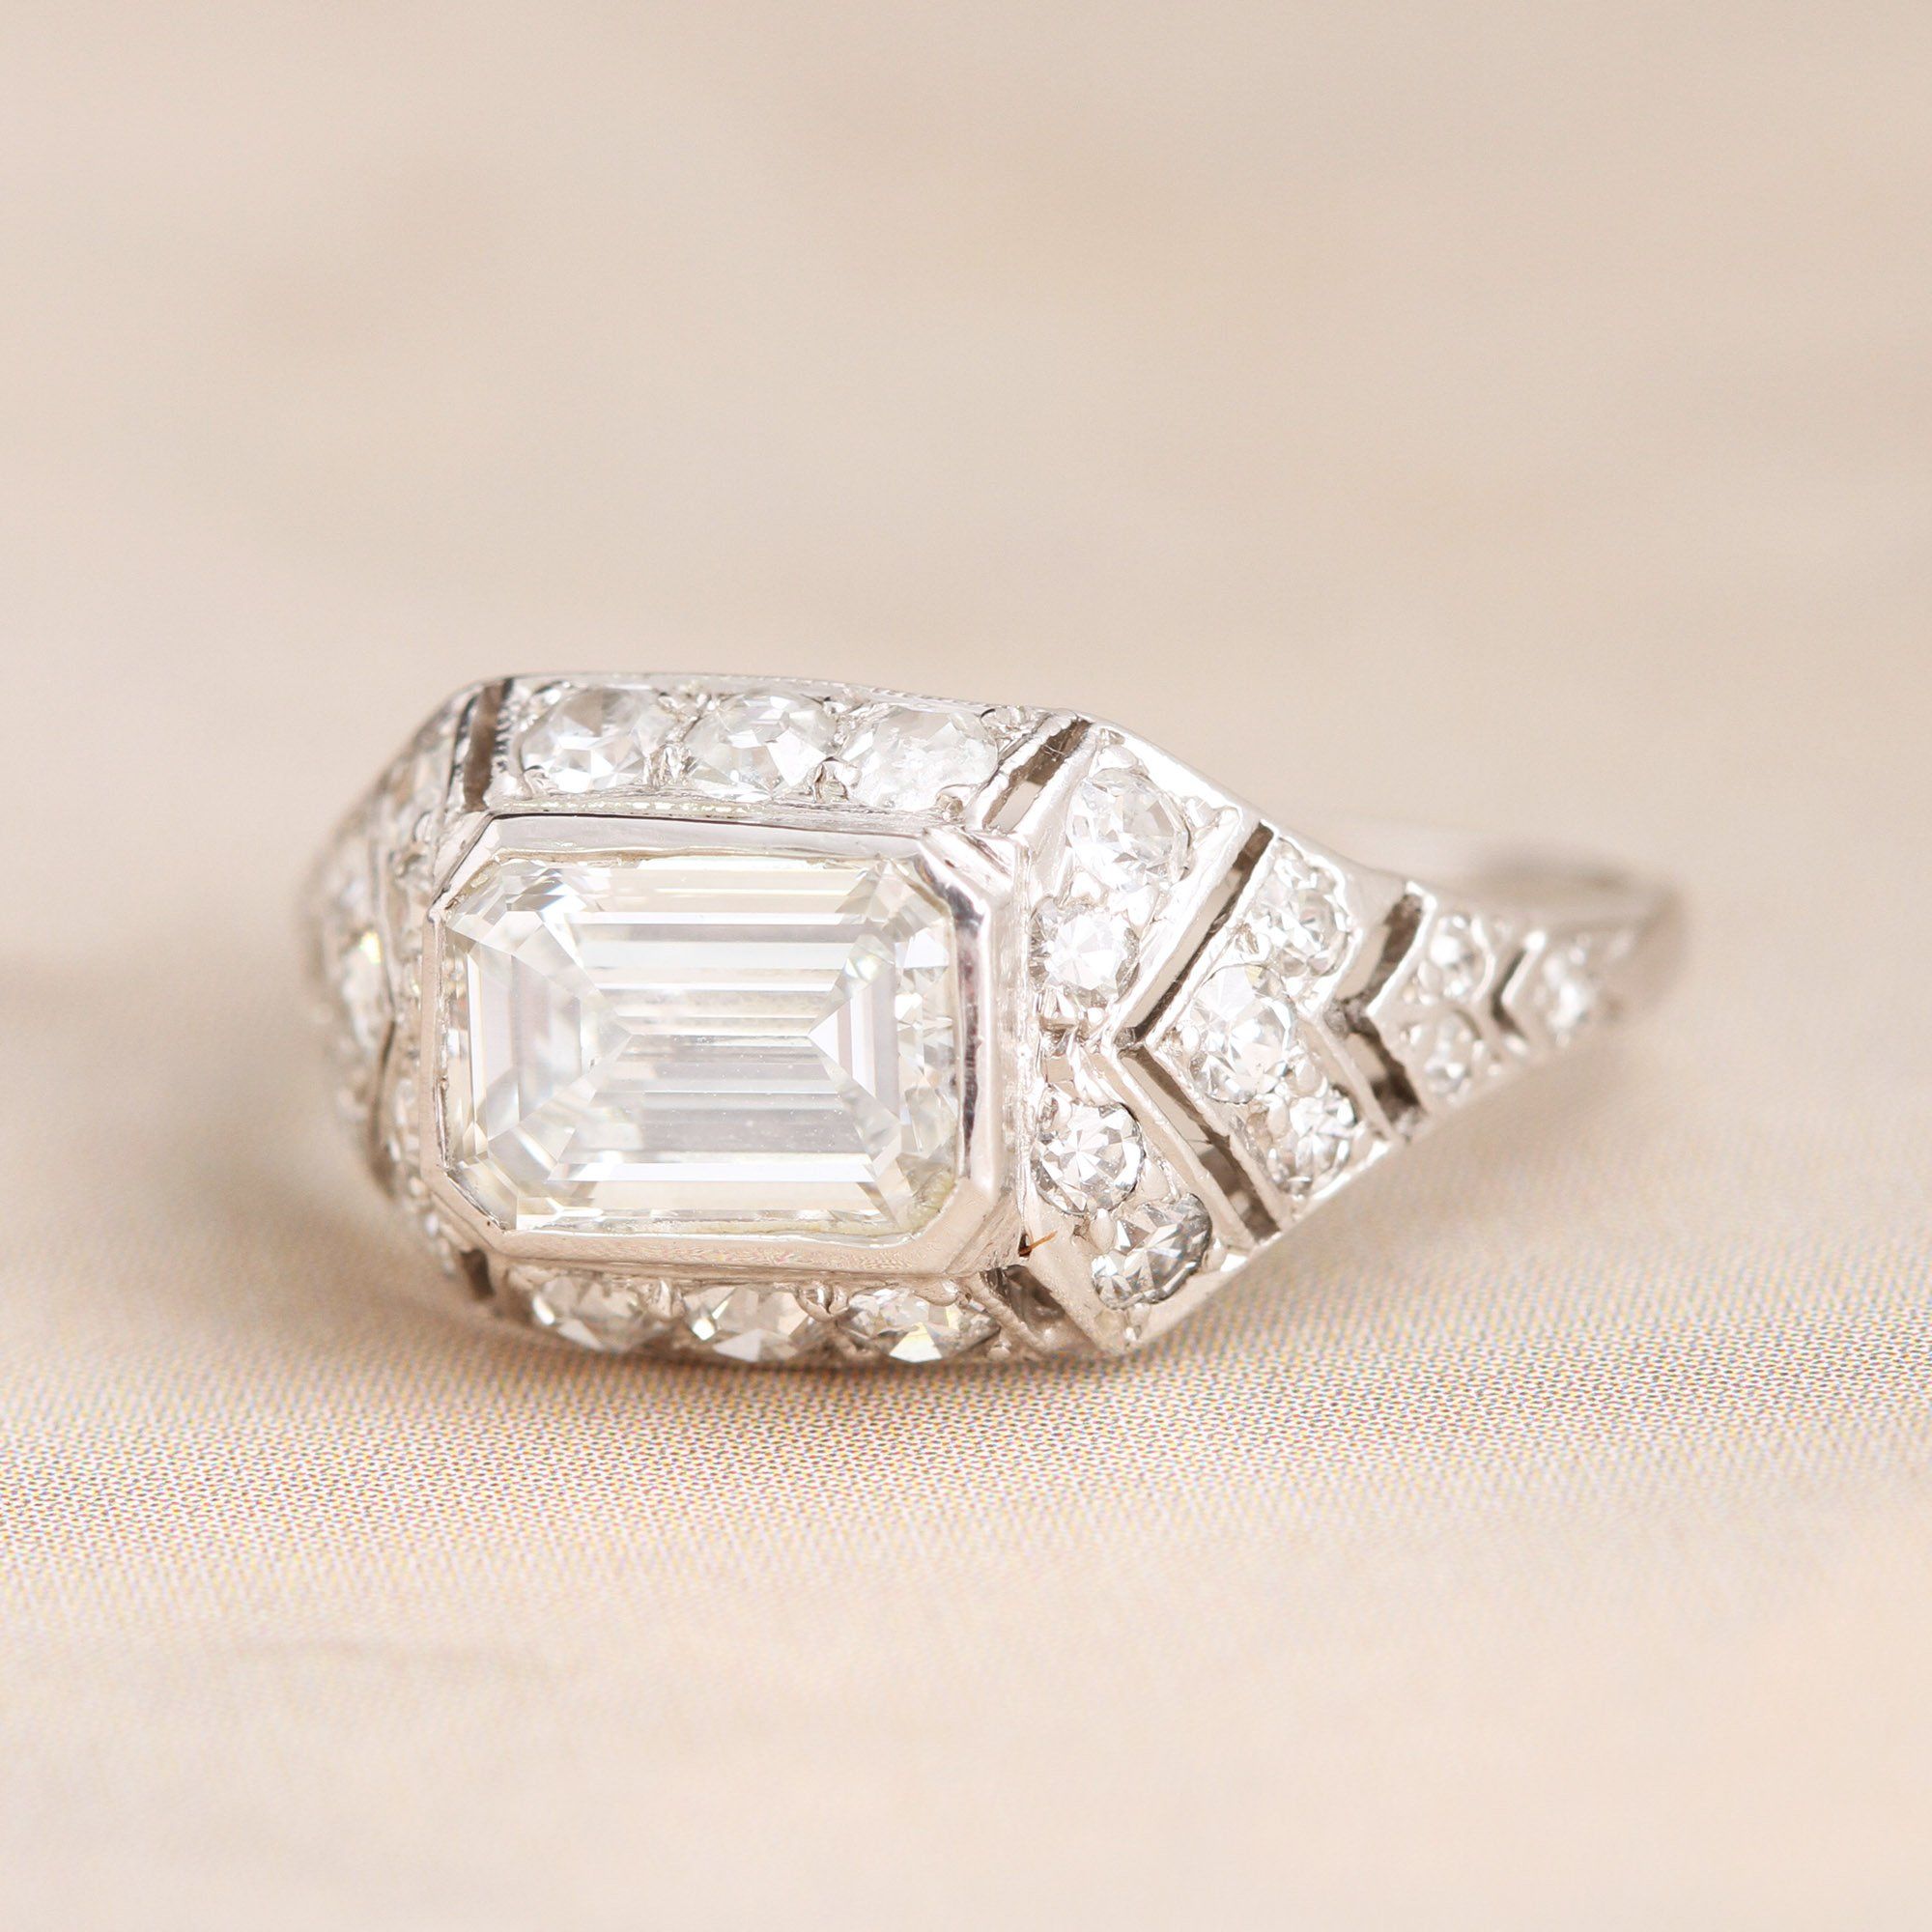 Art Deco Engagement Rings: From the 1920s to the 2020s